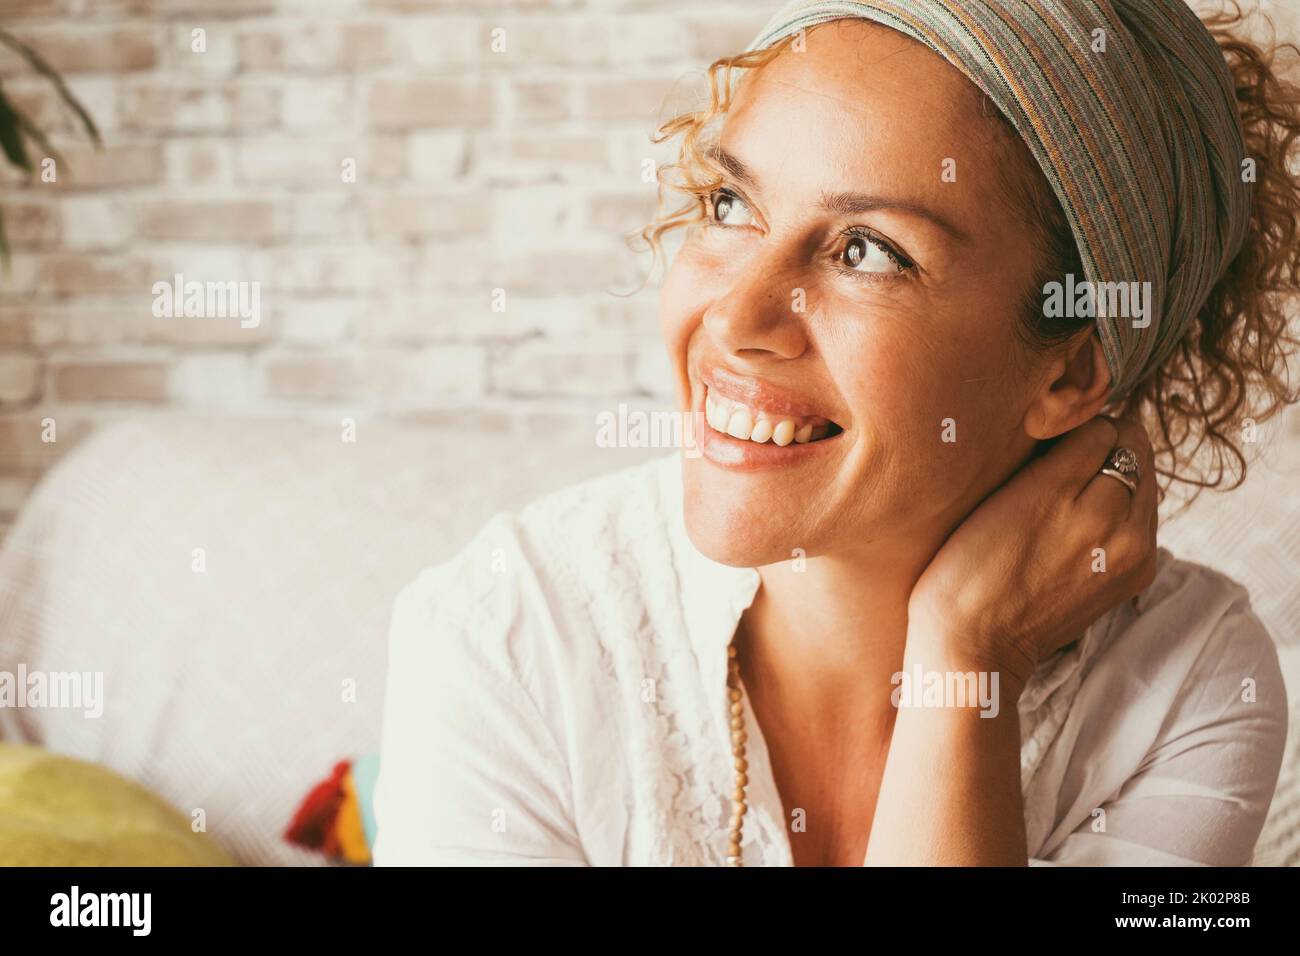 Portrait of cheerful adult woman smiling and enjoying life at home sitting on the sofa. Excited expression female people looking on her side. Attractive young lady enjoying leisure with a smile Stock Photo